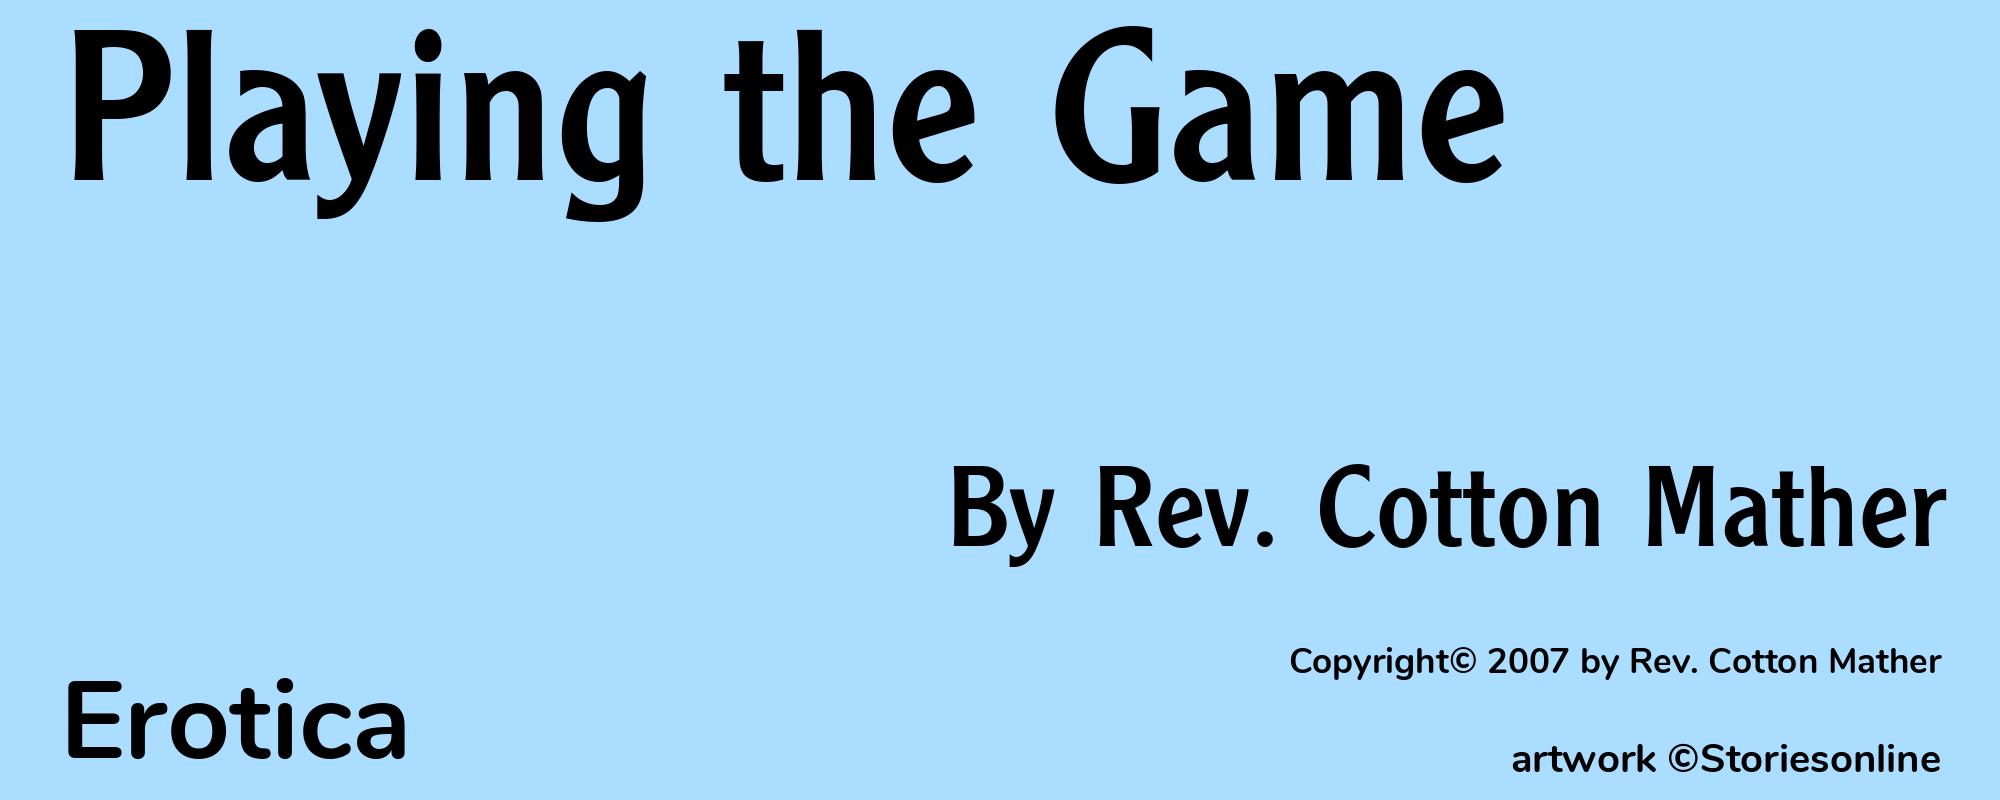 Playing the Game - Cover